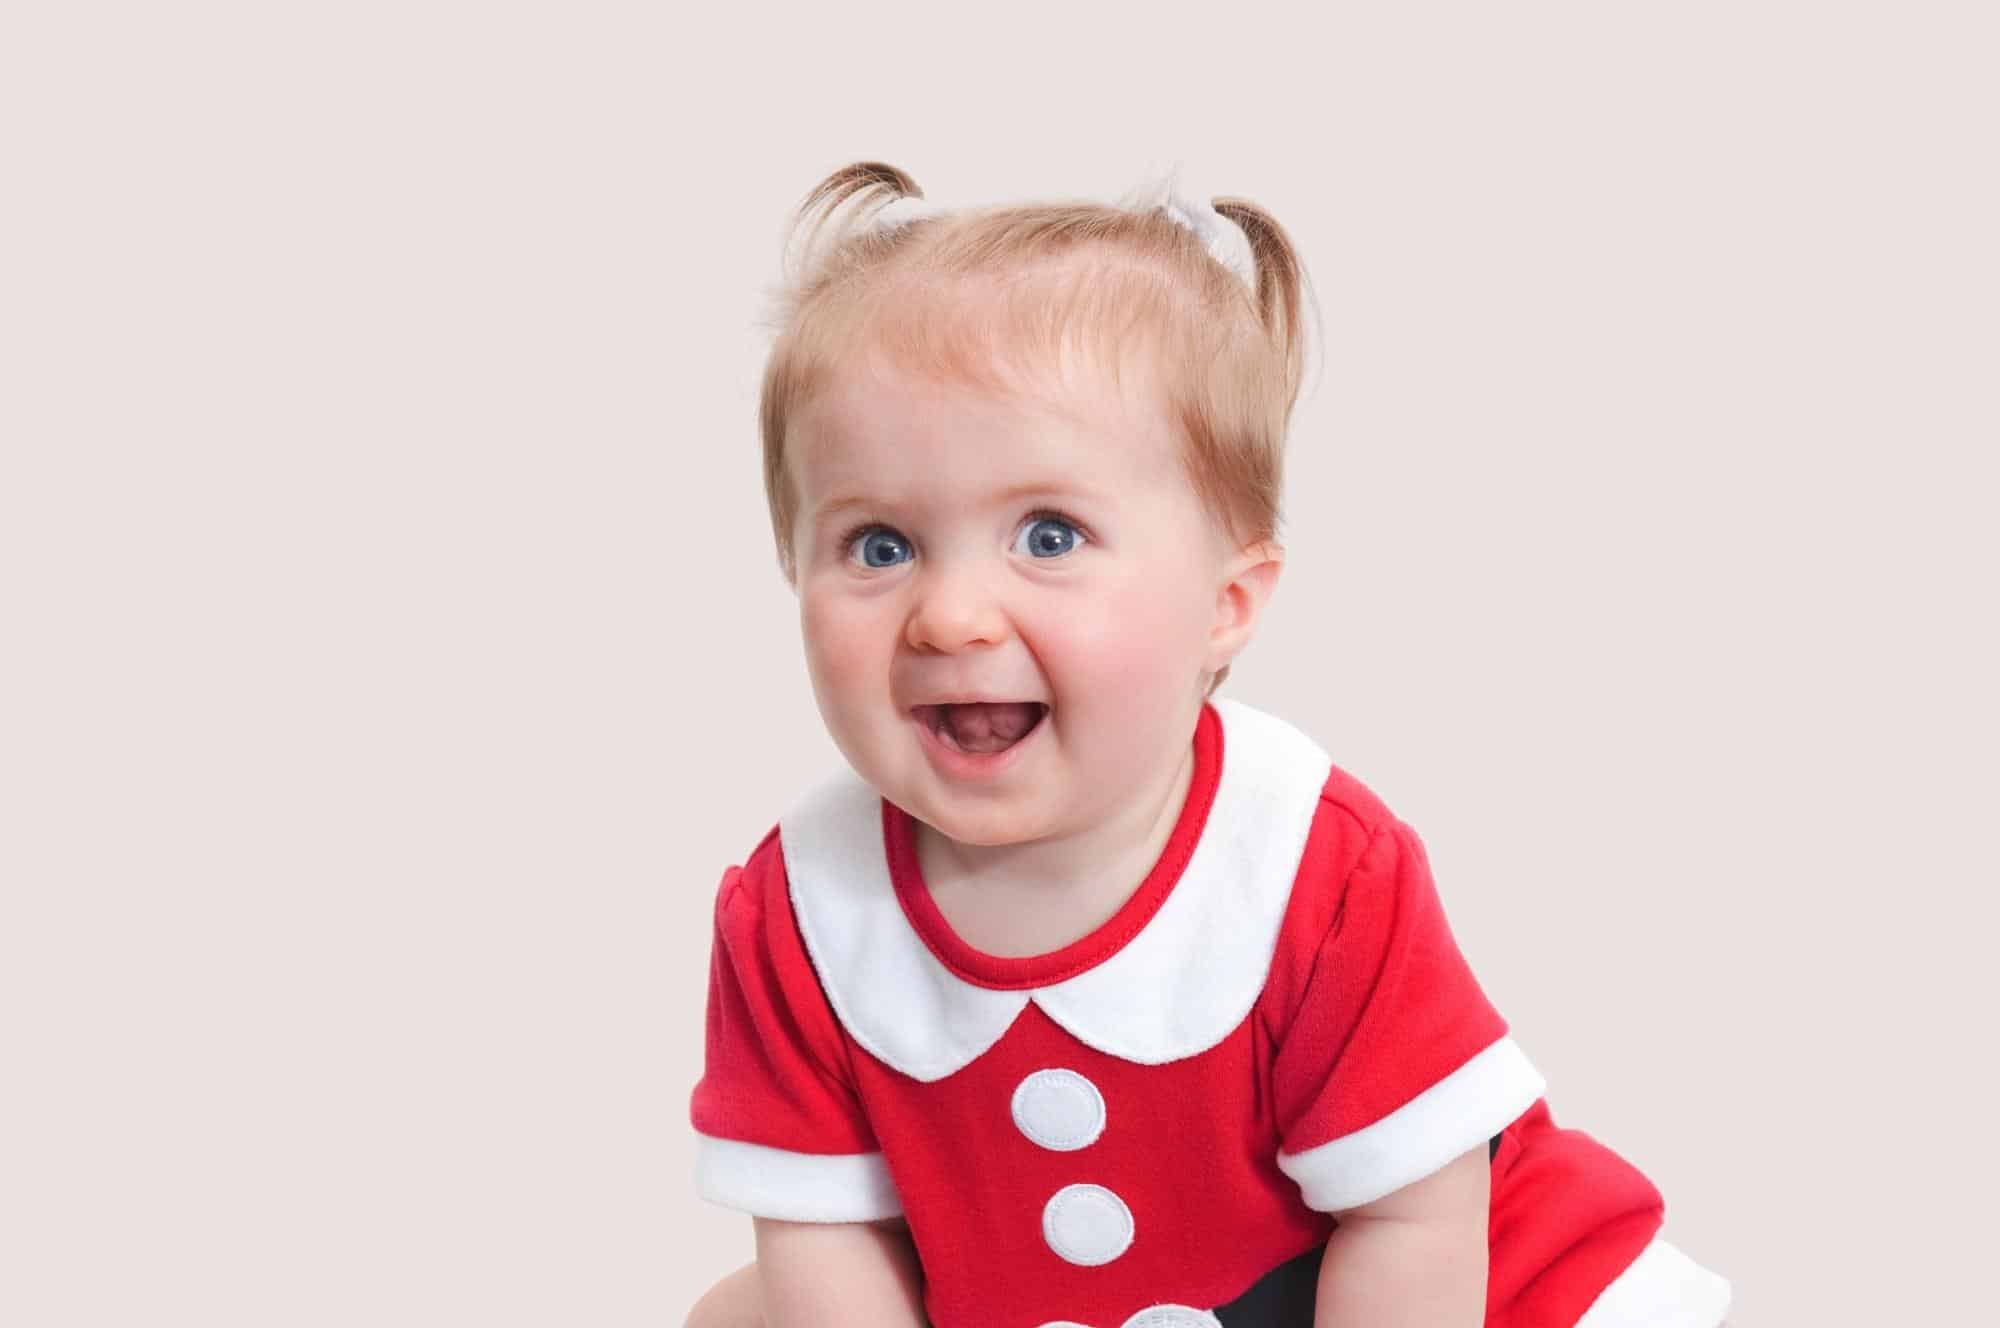 baby girl with red dress + pig tails